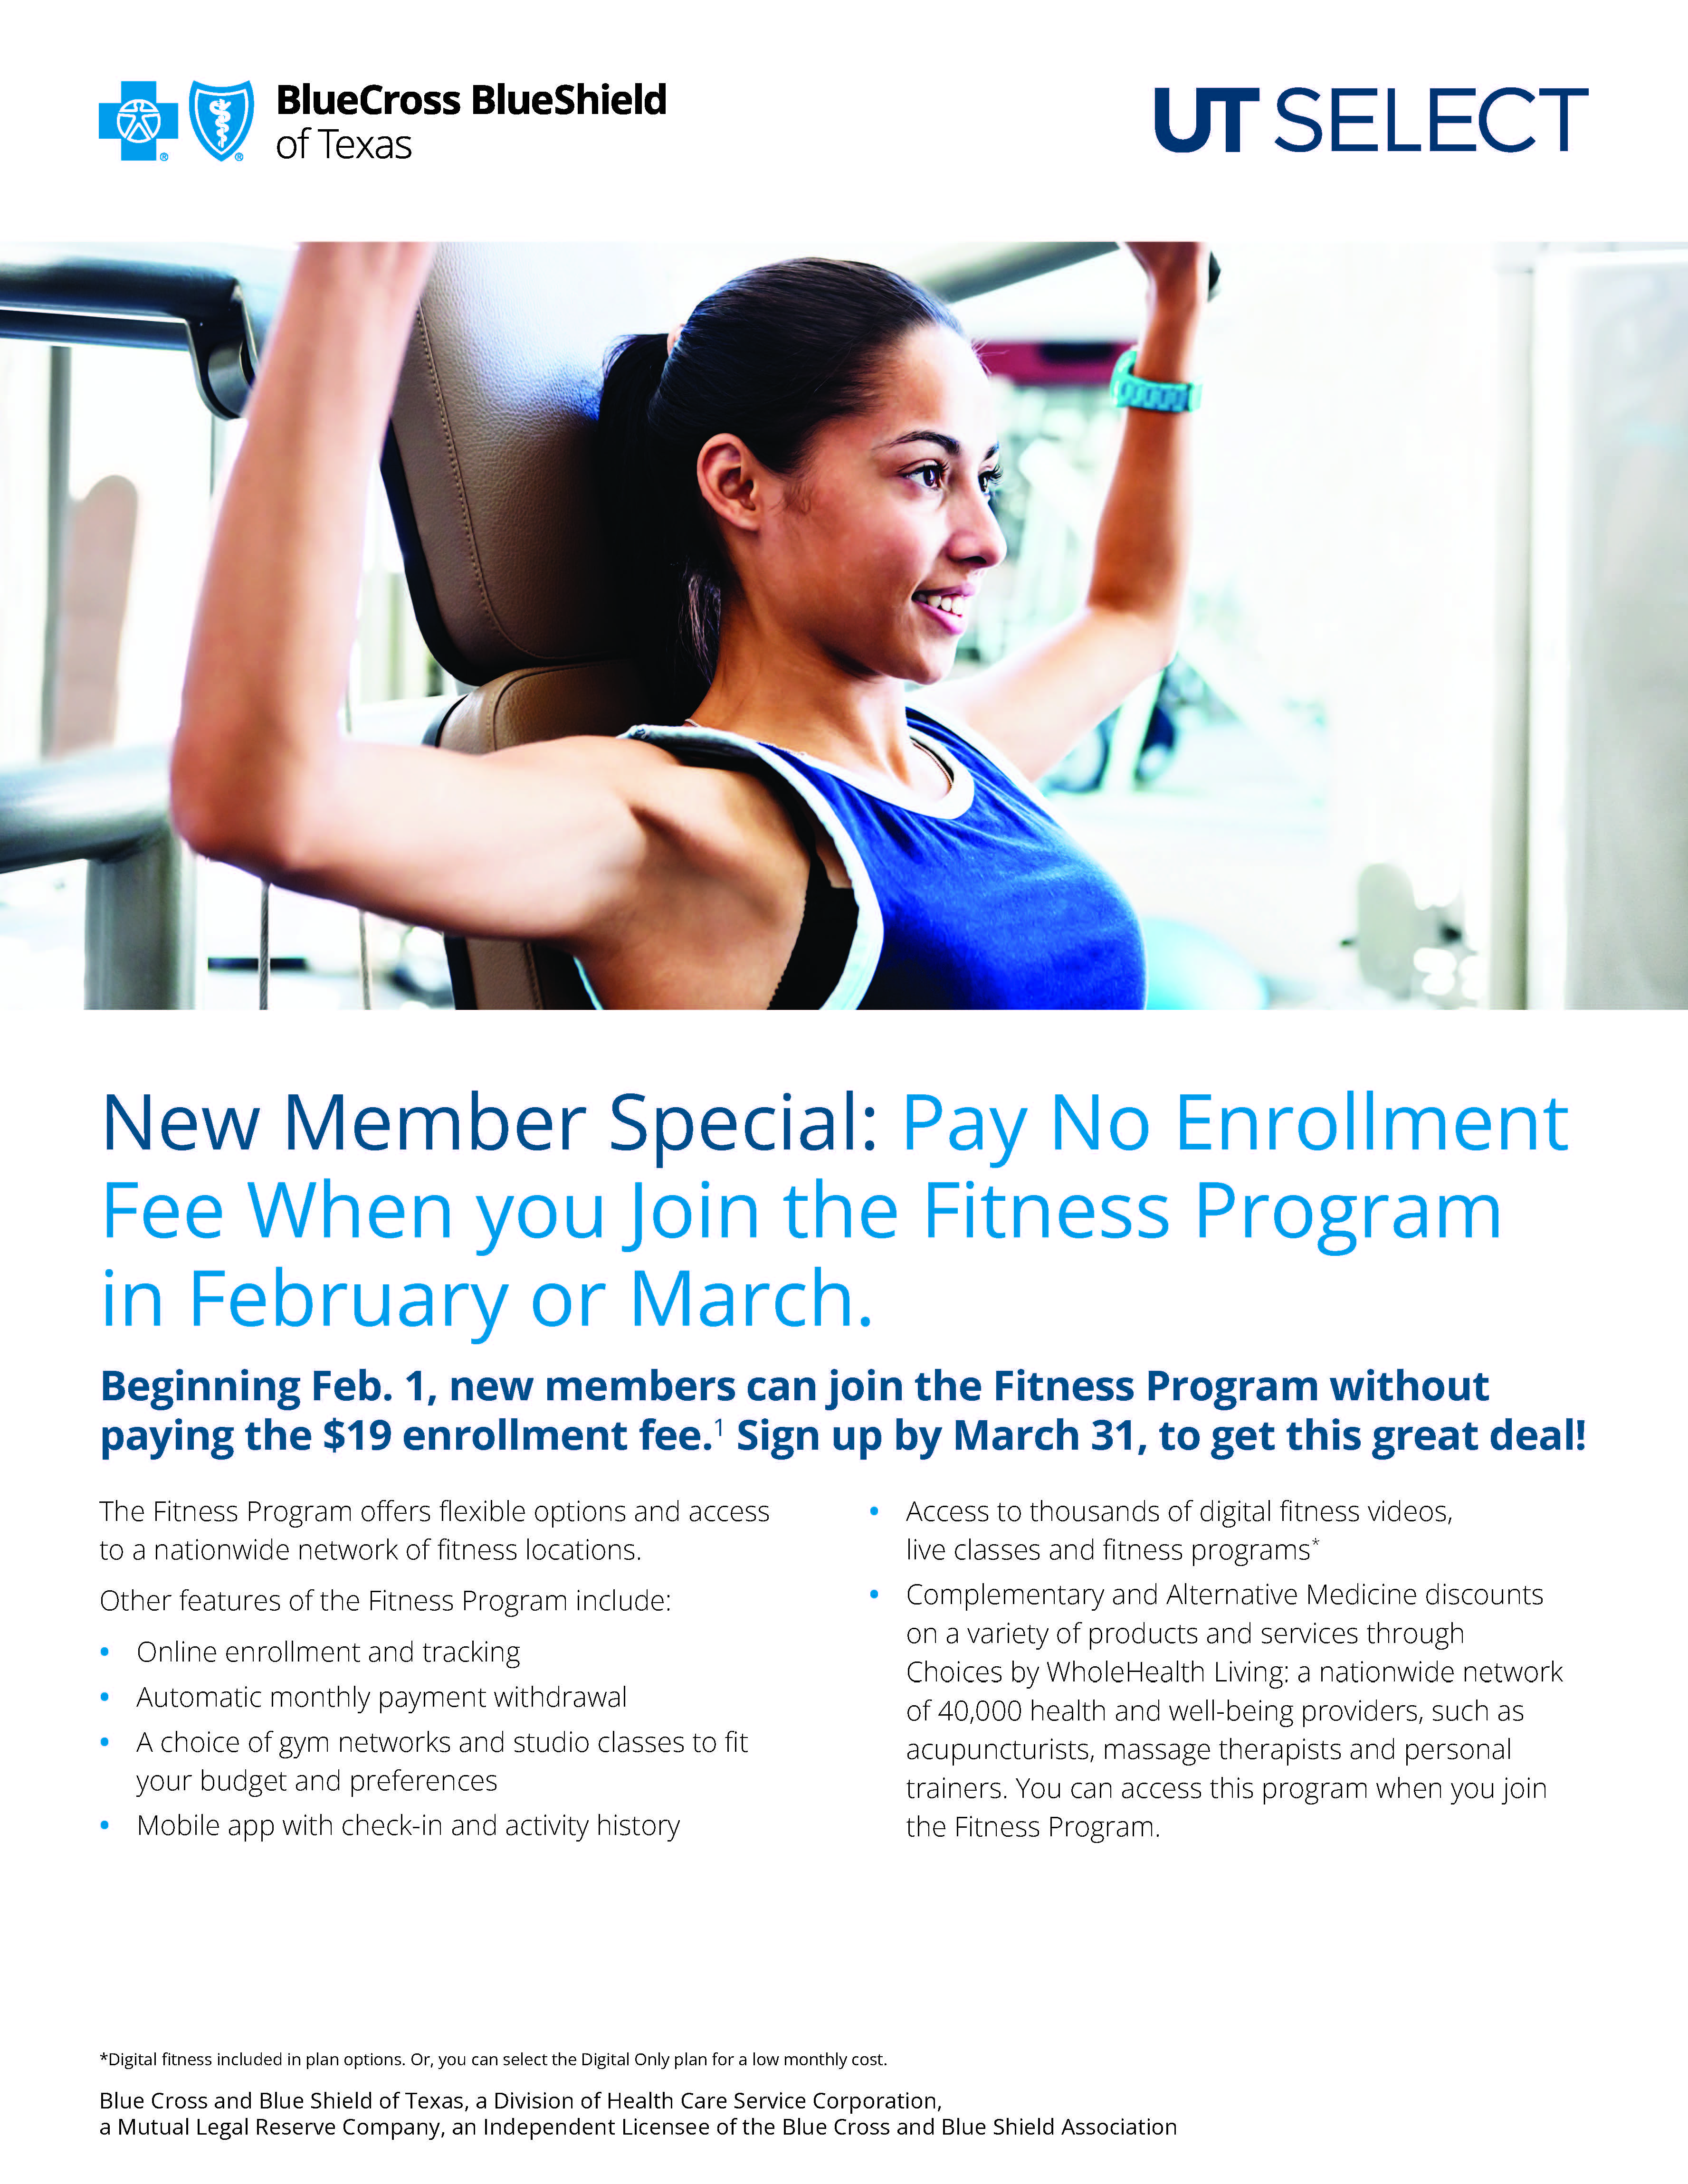 UT SELECT Fitness Program flyer cover page